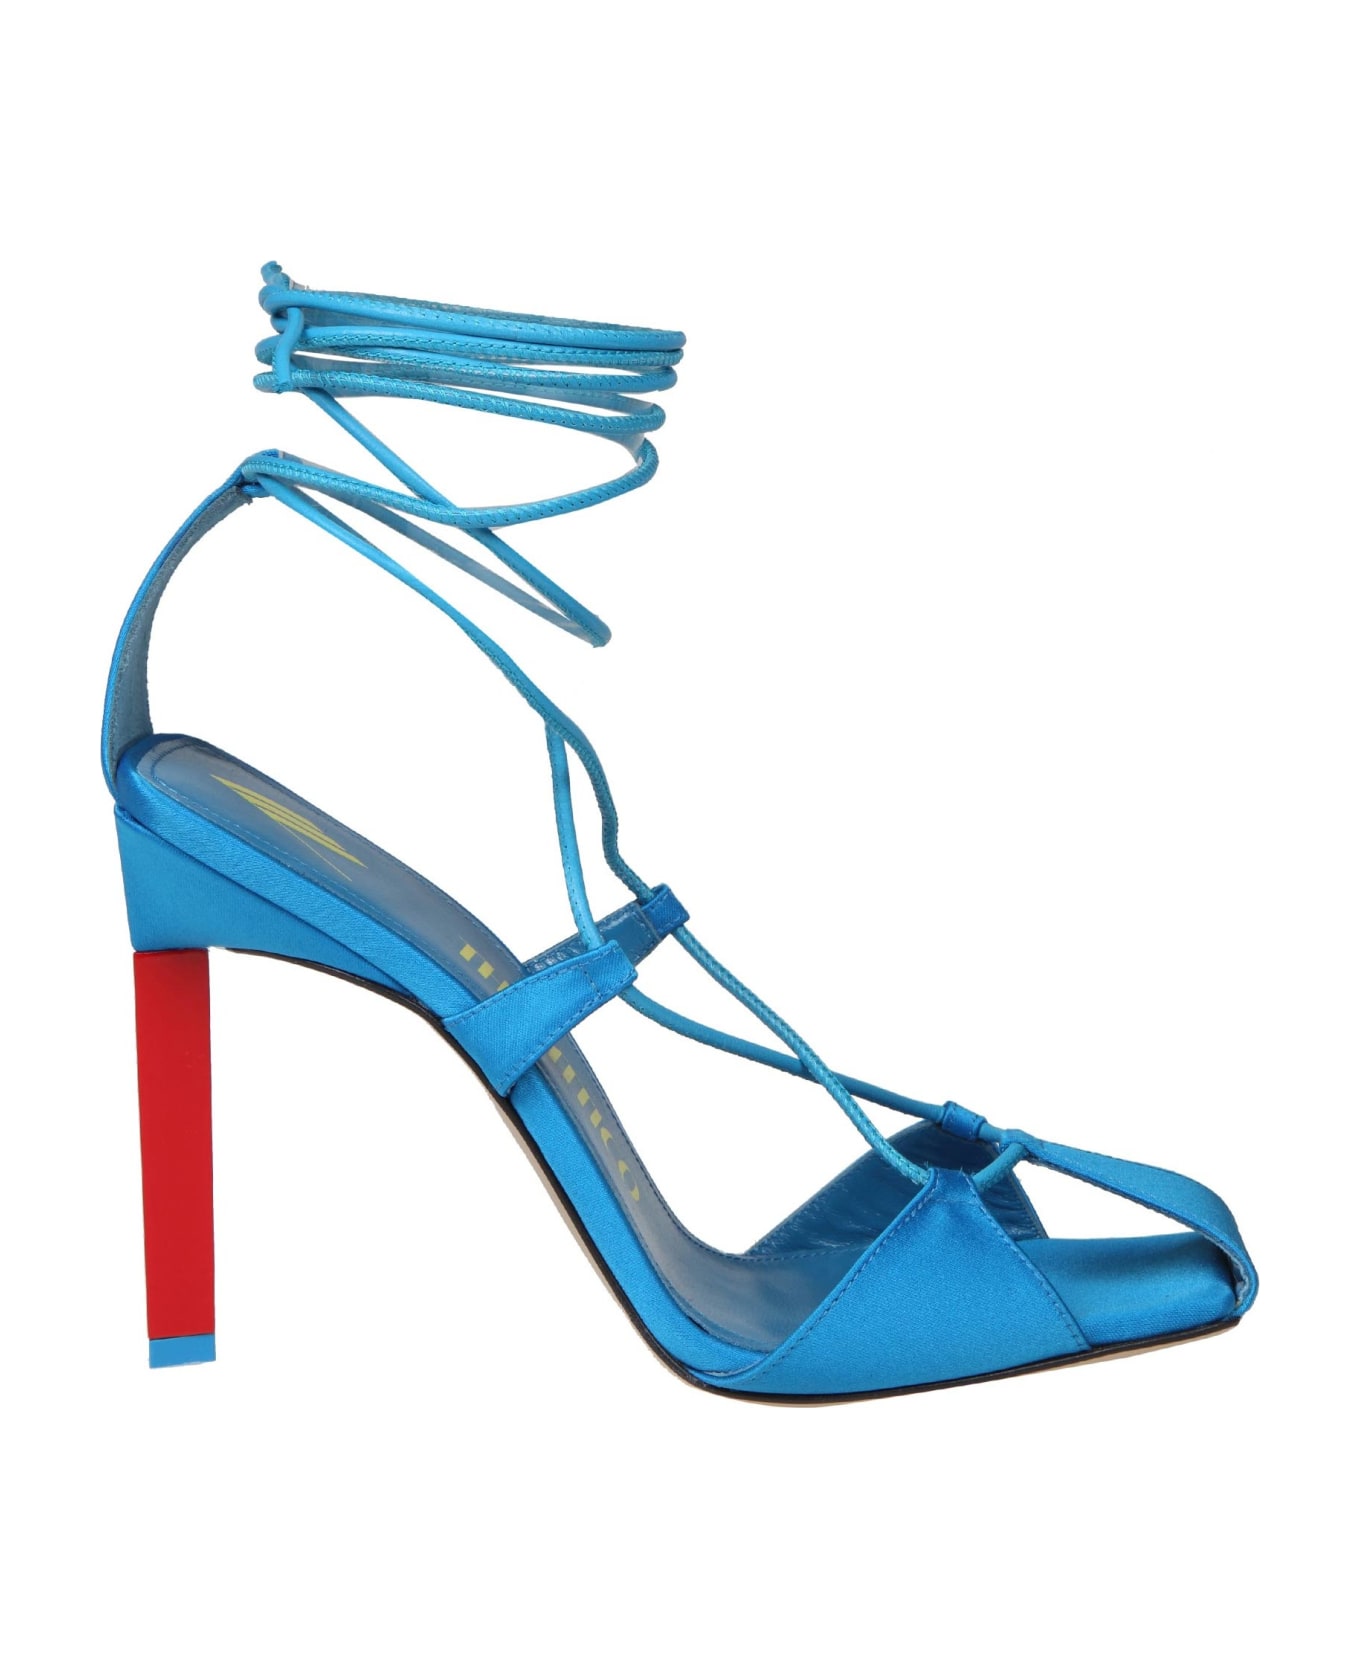 The Attico Adele Sandal In Turquoise Satin - Clear Blue